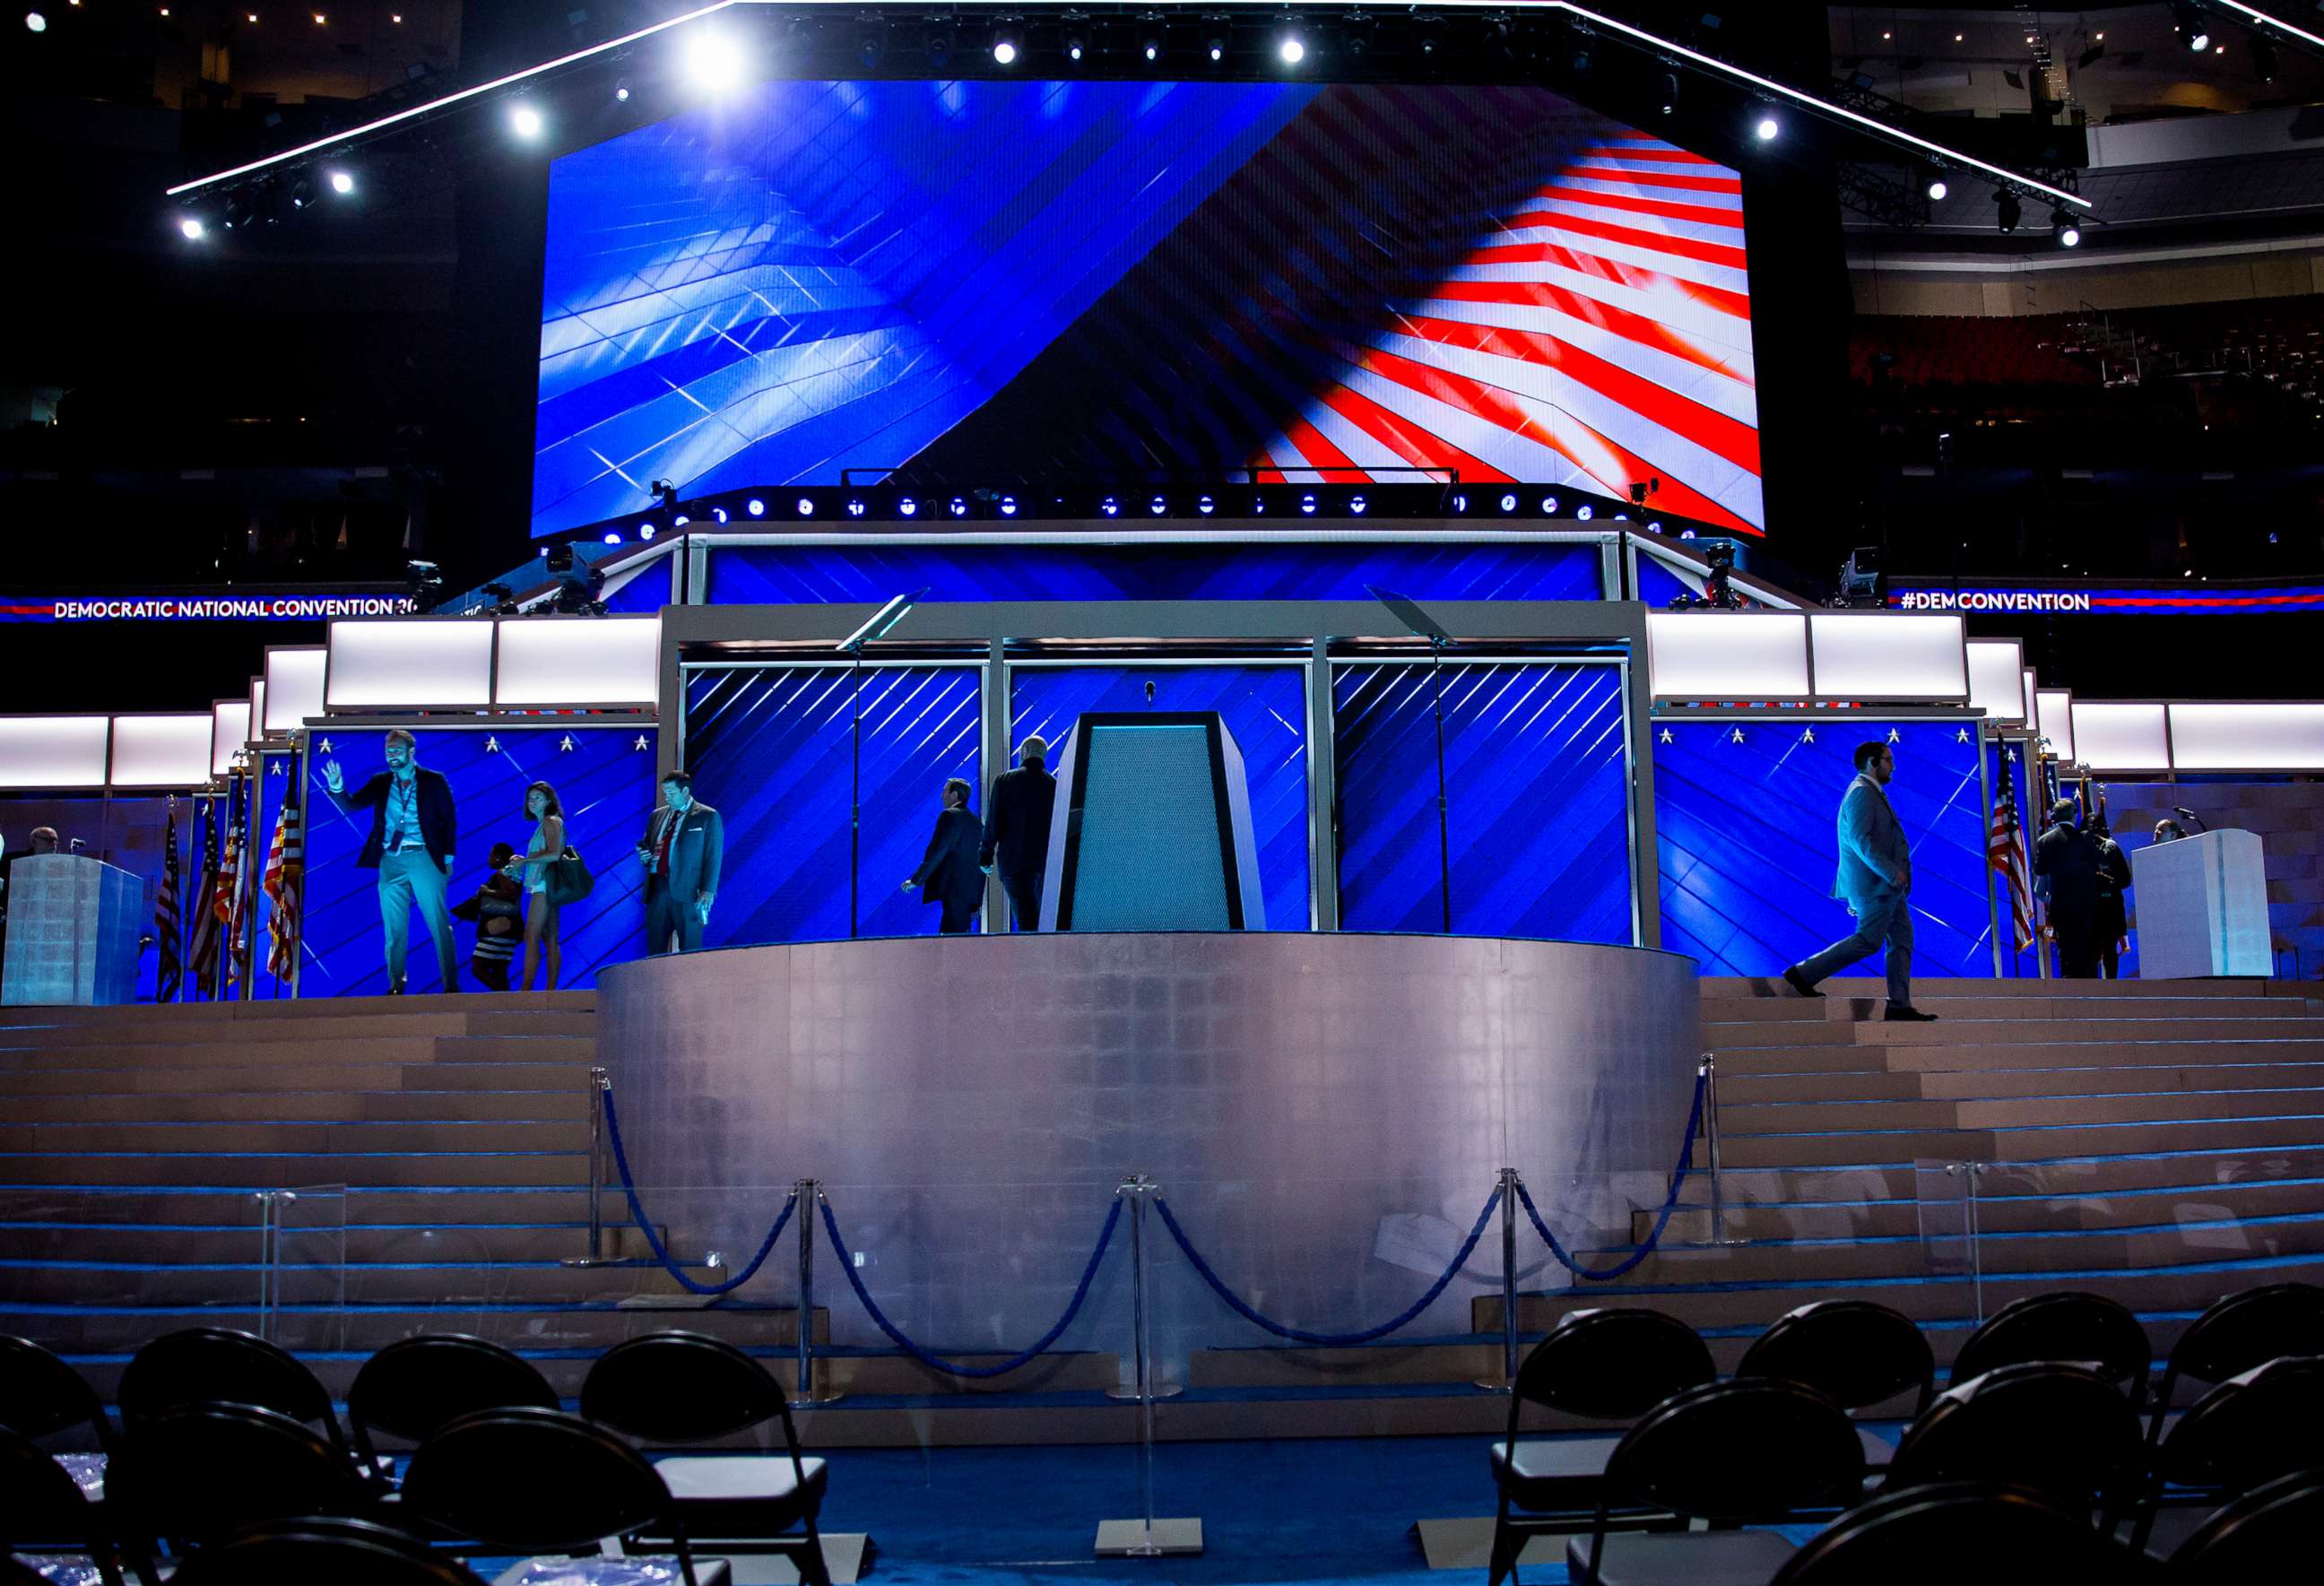 PHOTO: The stage at the Democratic National Convention in Philadelphia, July 28, 2016.